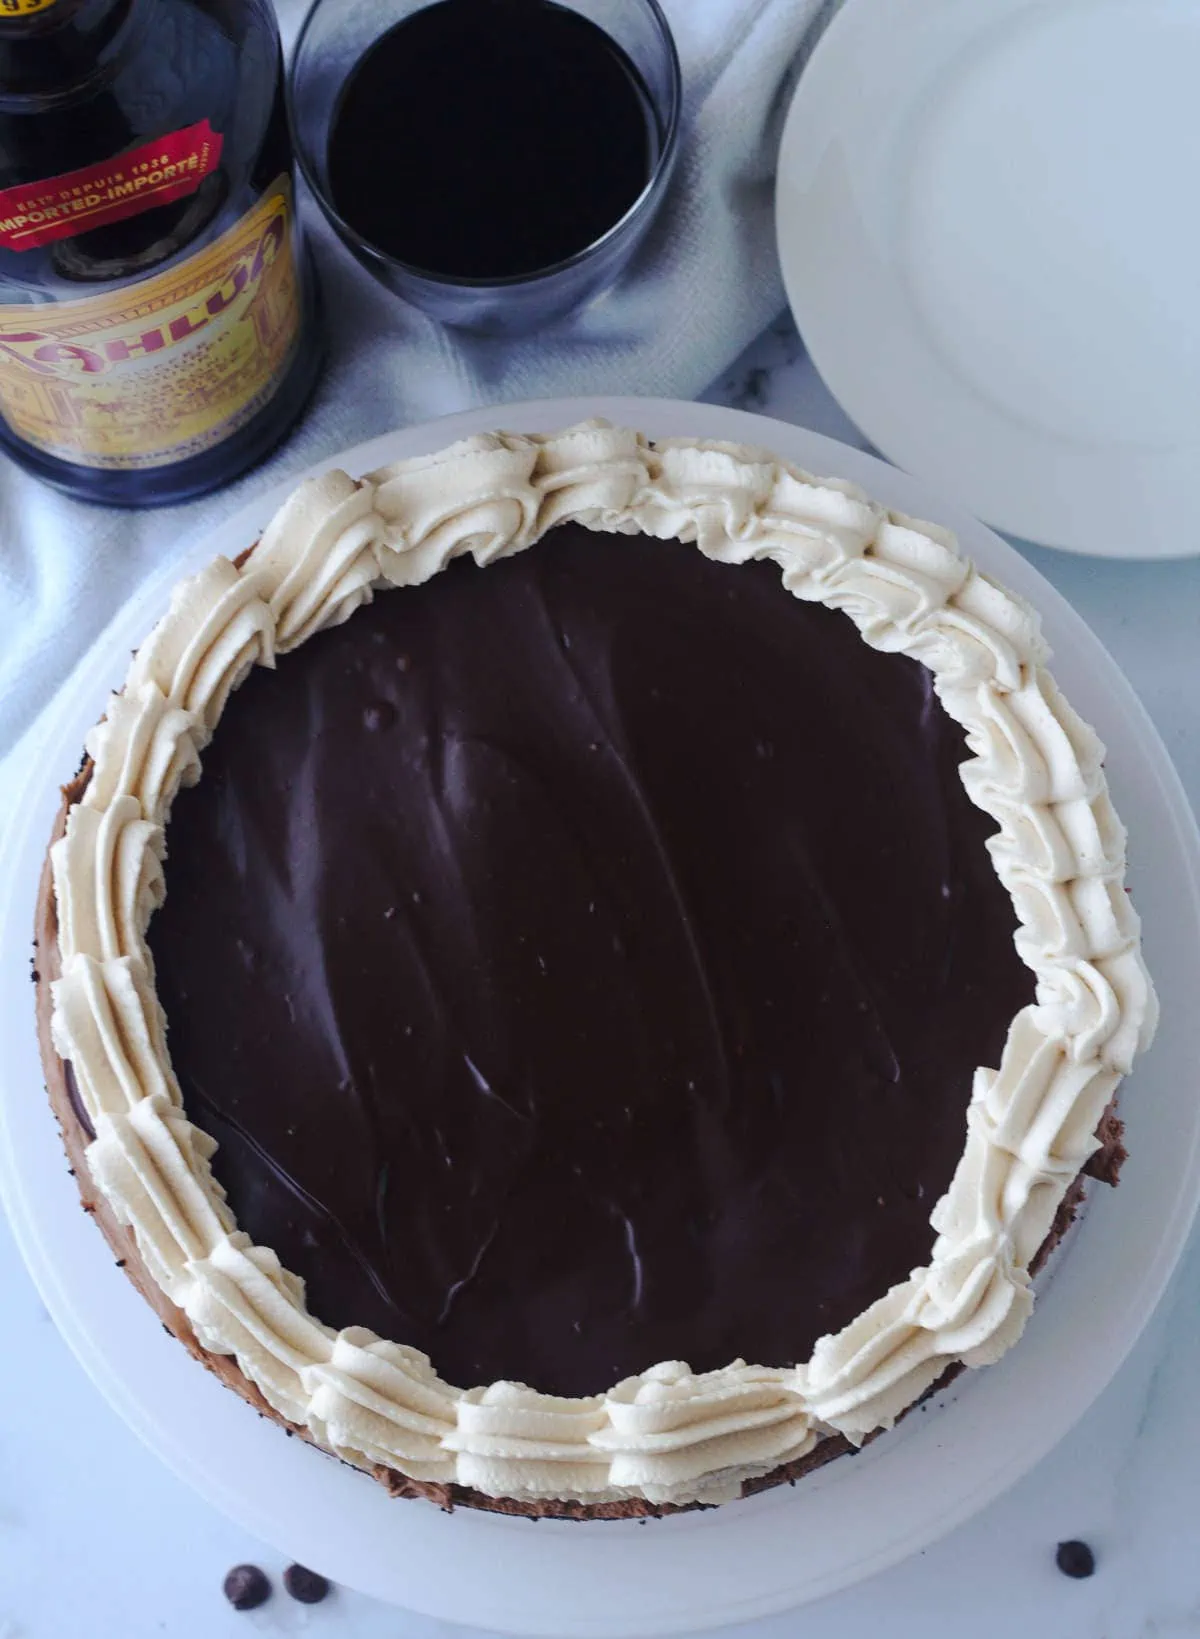 A top view of a cheesecake.  A Kahlua liquor bottle is to the top left of the cake.  Beside it is a glass filled with Kahlua.  A pile of dessert plates or on the top right of the cake.